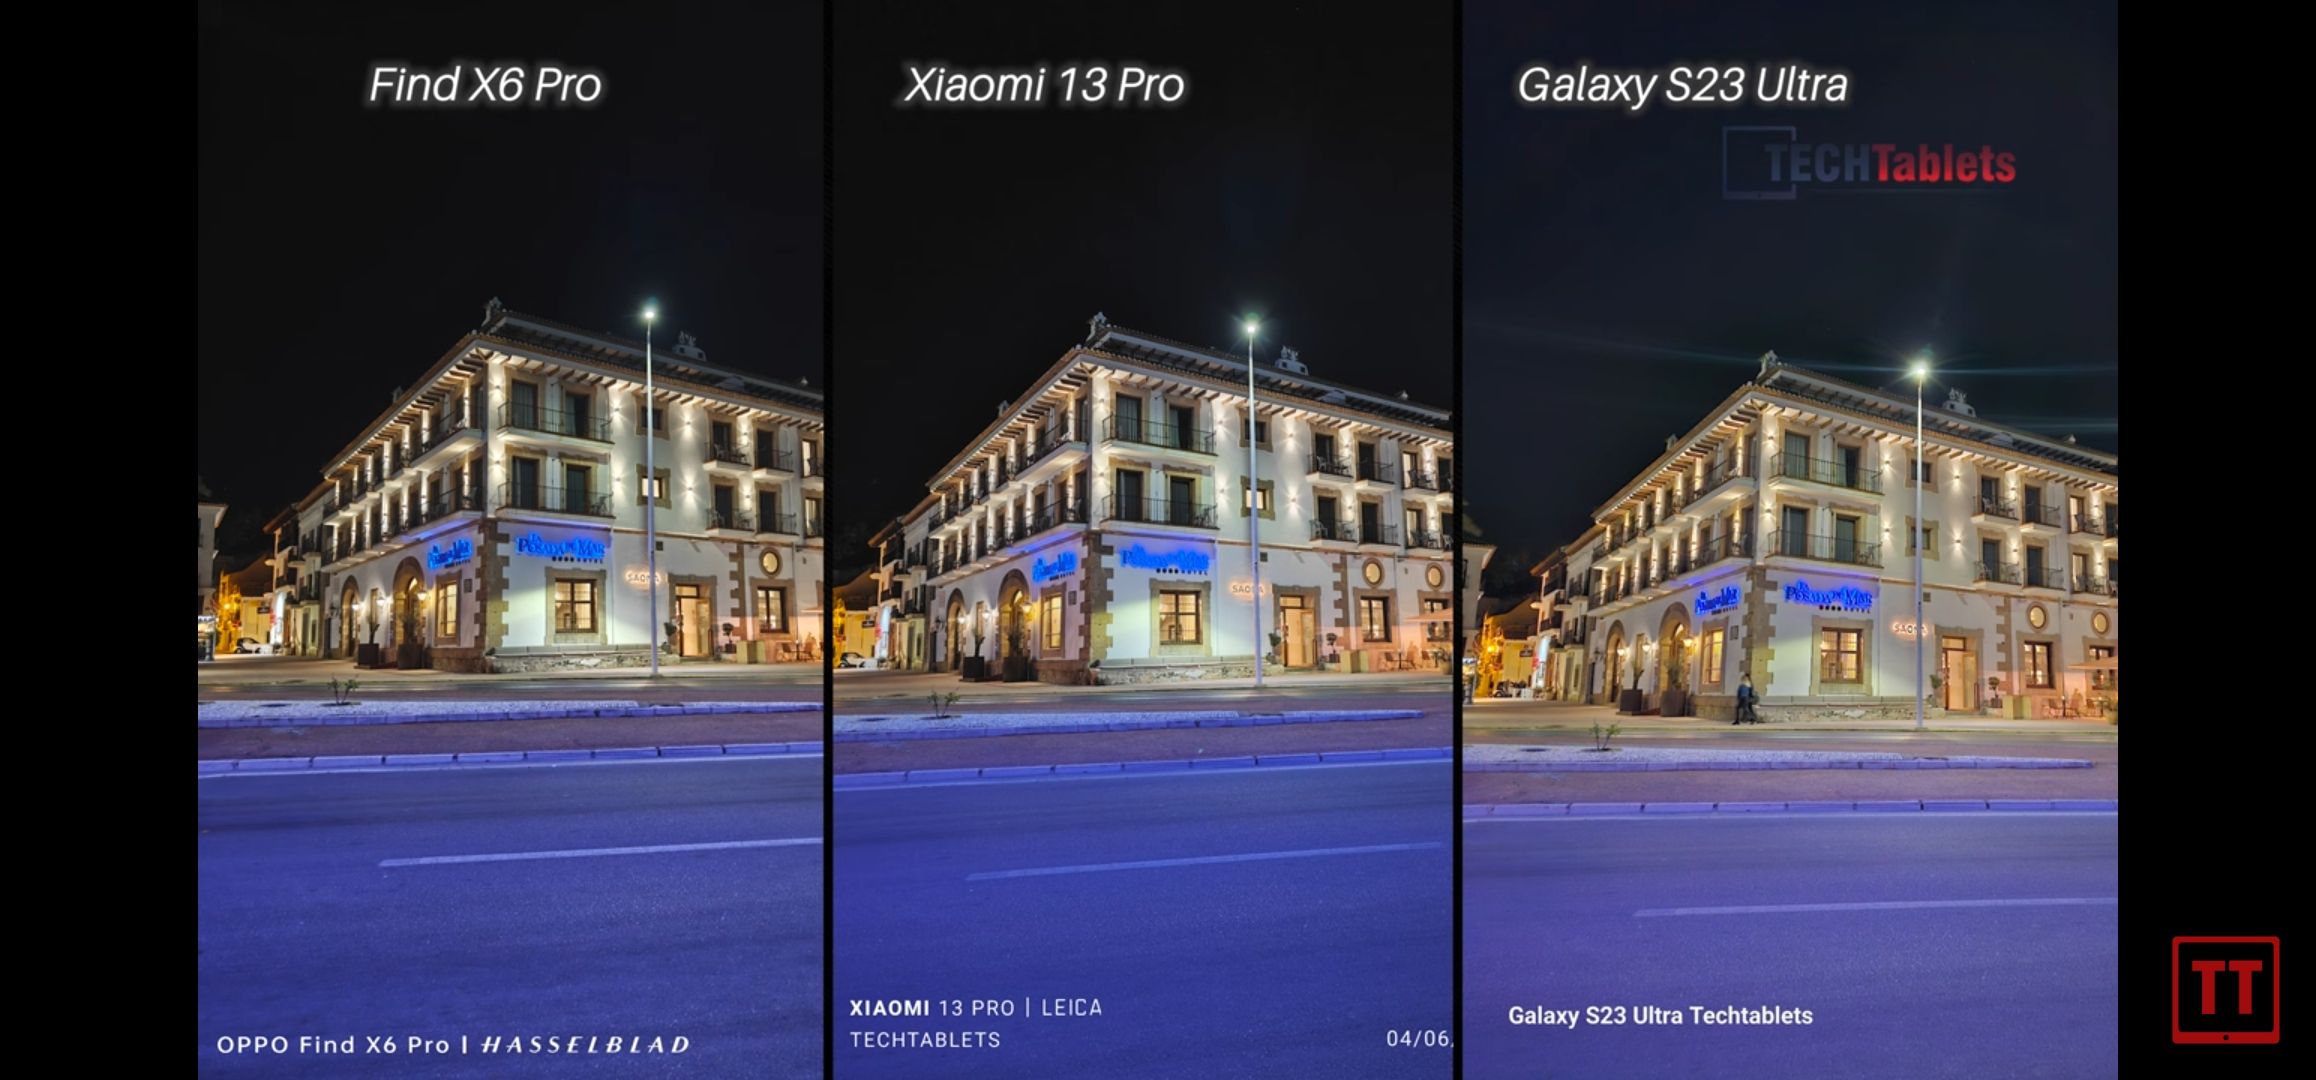 Night mode camera has lens flare and dull sky on S - Samsung Members